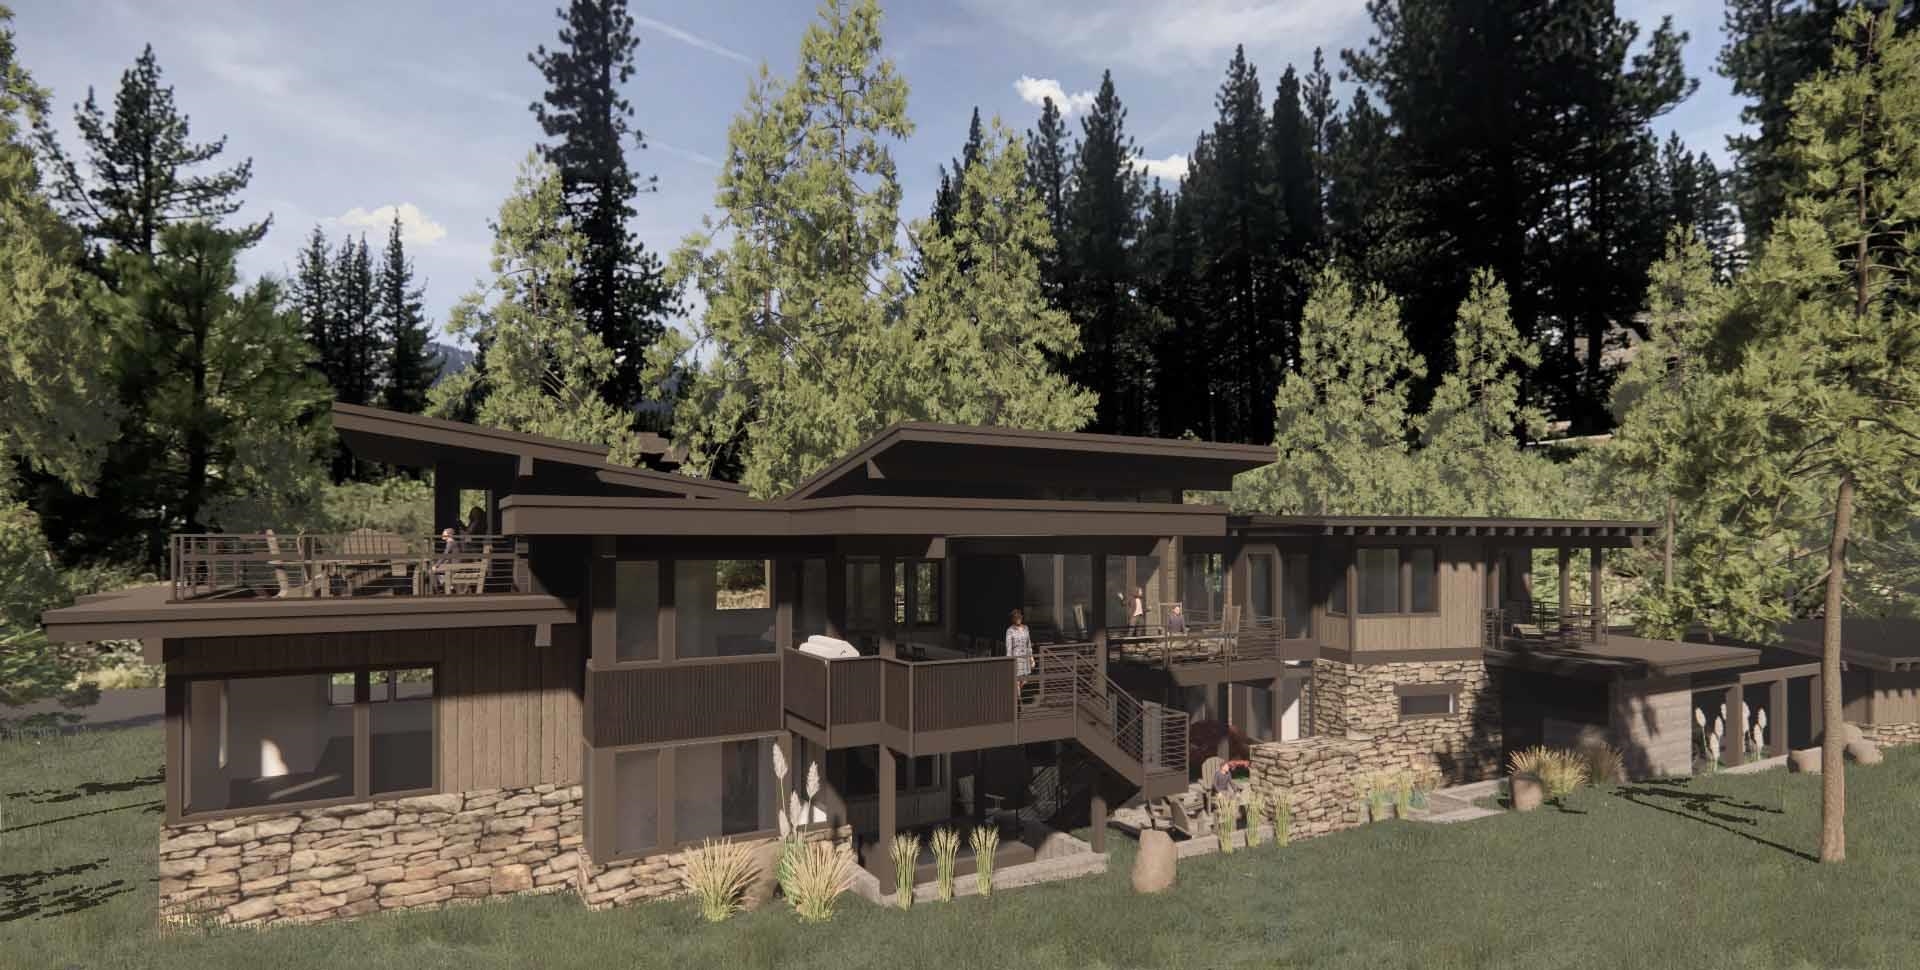 Image for 13260 Snowshoe Thompson, Truckee, CA 96161-0000